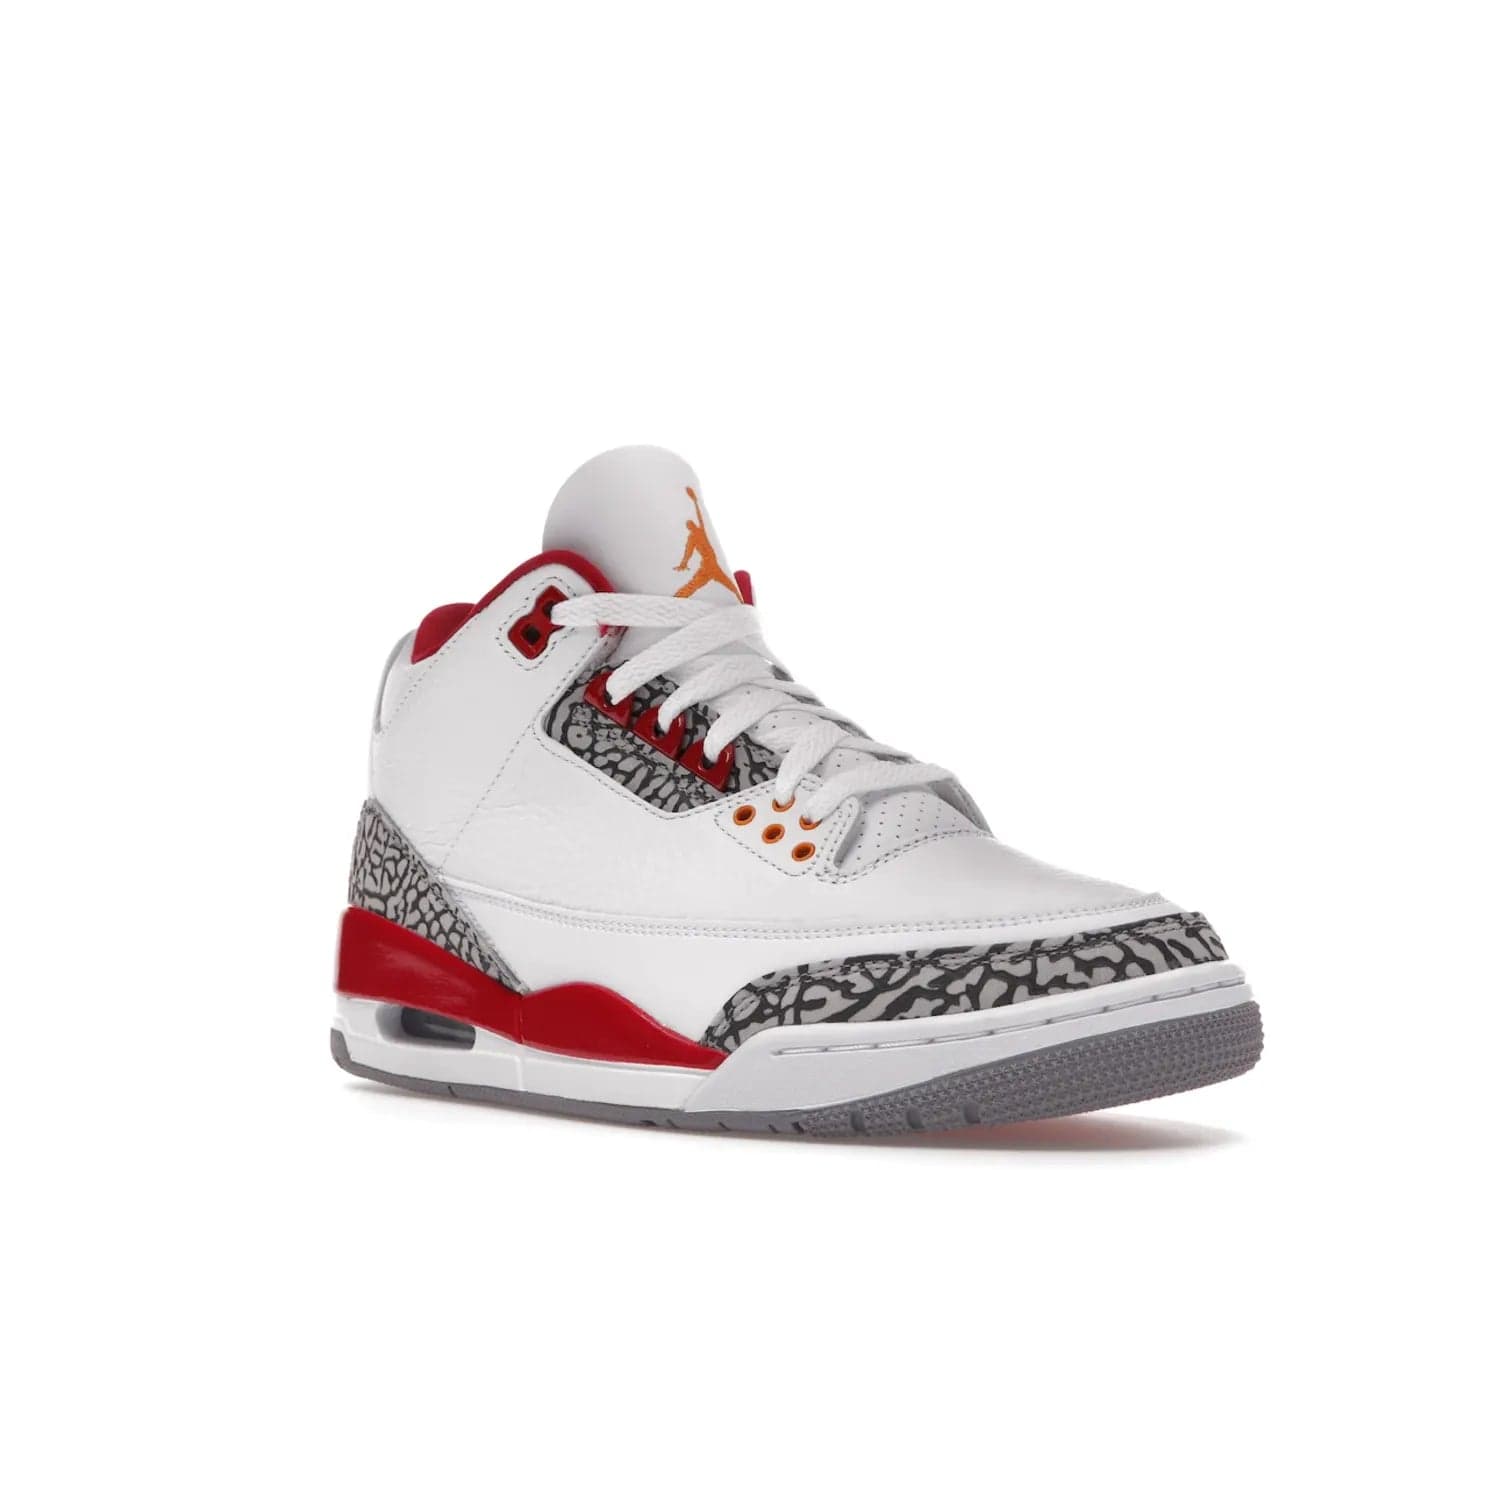 Jordan 3 Retro Cardinal Red - Image 6 - Only at www.BallersClubKickz.com - Air Jordan 3 Retro Cardinal Red combines classic style and modern appeal - white tumbled leather, signature Elephant Print overlays, cardinal red midsoles, Jumpman logo embroidery. Available Feb 2022.